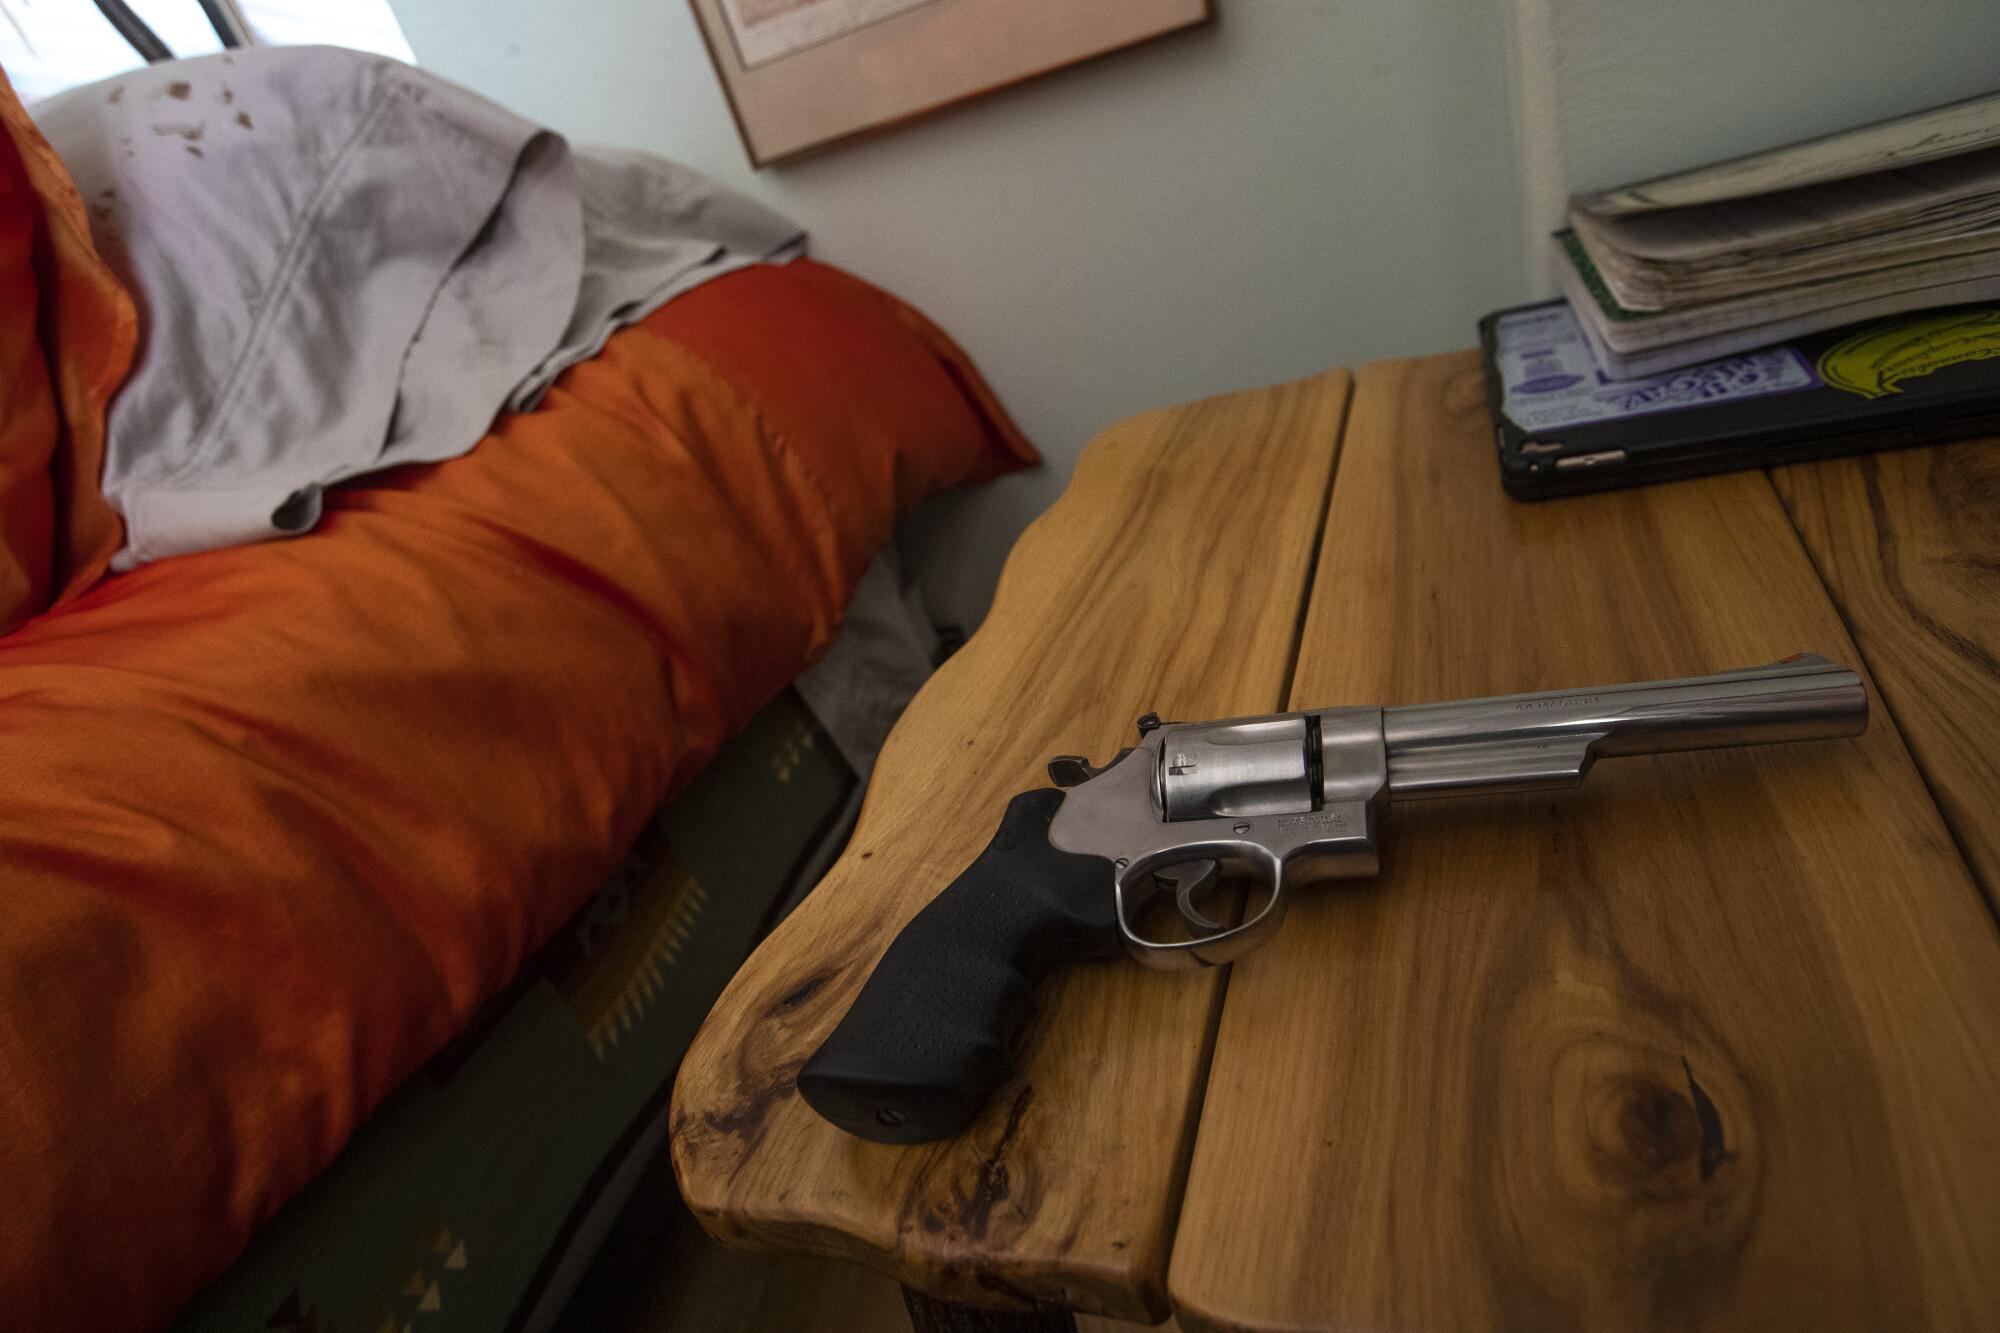 The .44 magnum found on Noel Manners' nightstand.